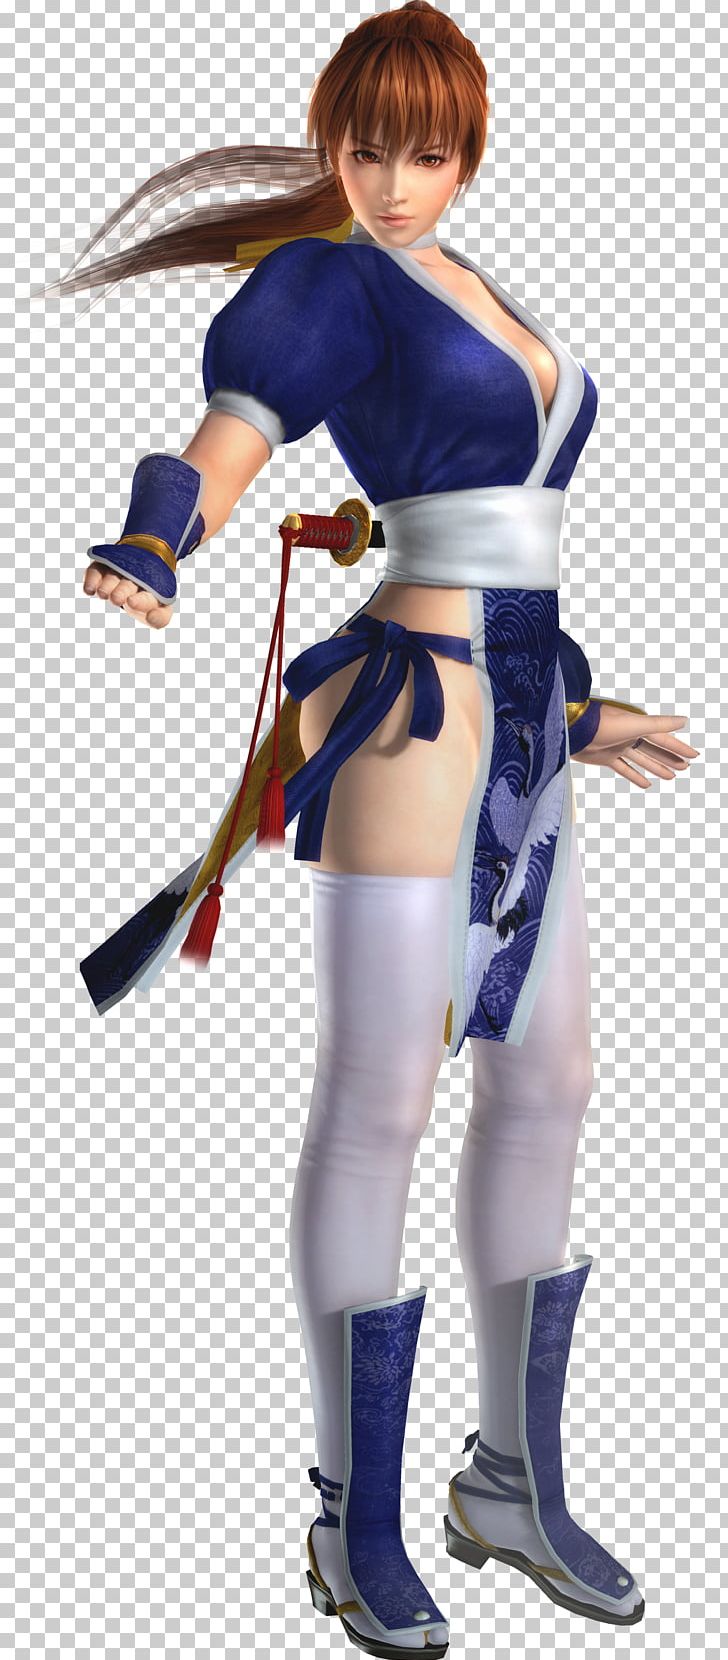 Dead Or Alive 5 Dead Or Alive 4 Kasumi DOA: Dead Or Alive PNG, Clipart, Cartoon, Clothing, Cosplay, Costume, Dead Or Alive Free PNG Download